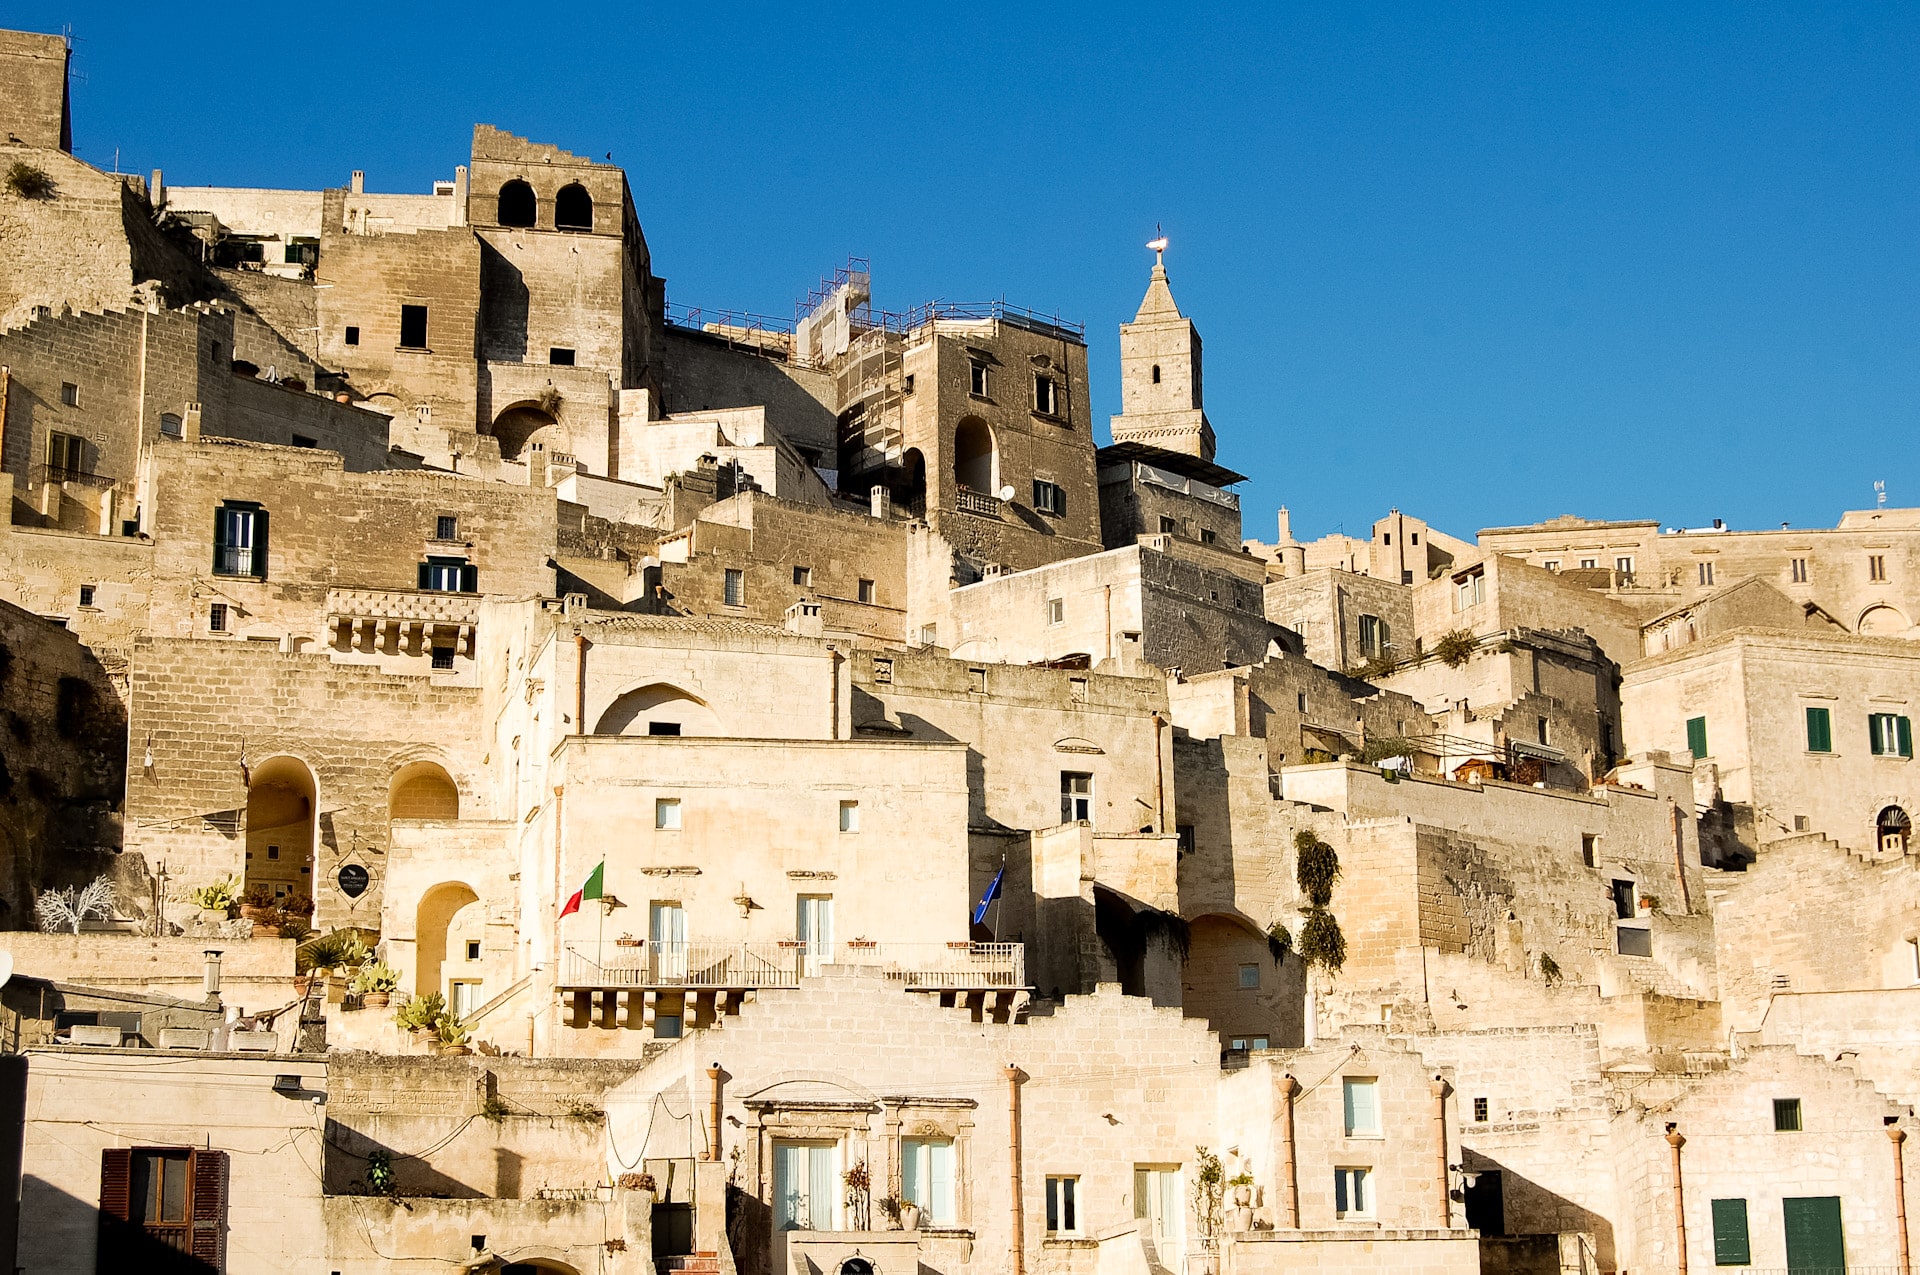 The UNESCO-listed site Sassi di Matera, also known as Centro Storico, is the best area to stay in Matera, Italy